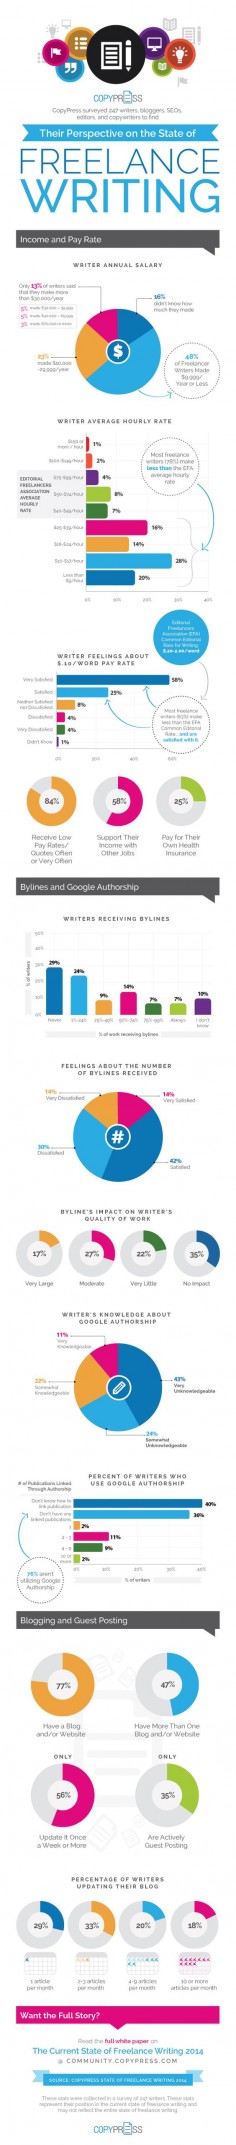 How Much Should You Be Paying Writers for Content? [INFOGRAPHIC] | Social Media Today